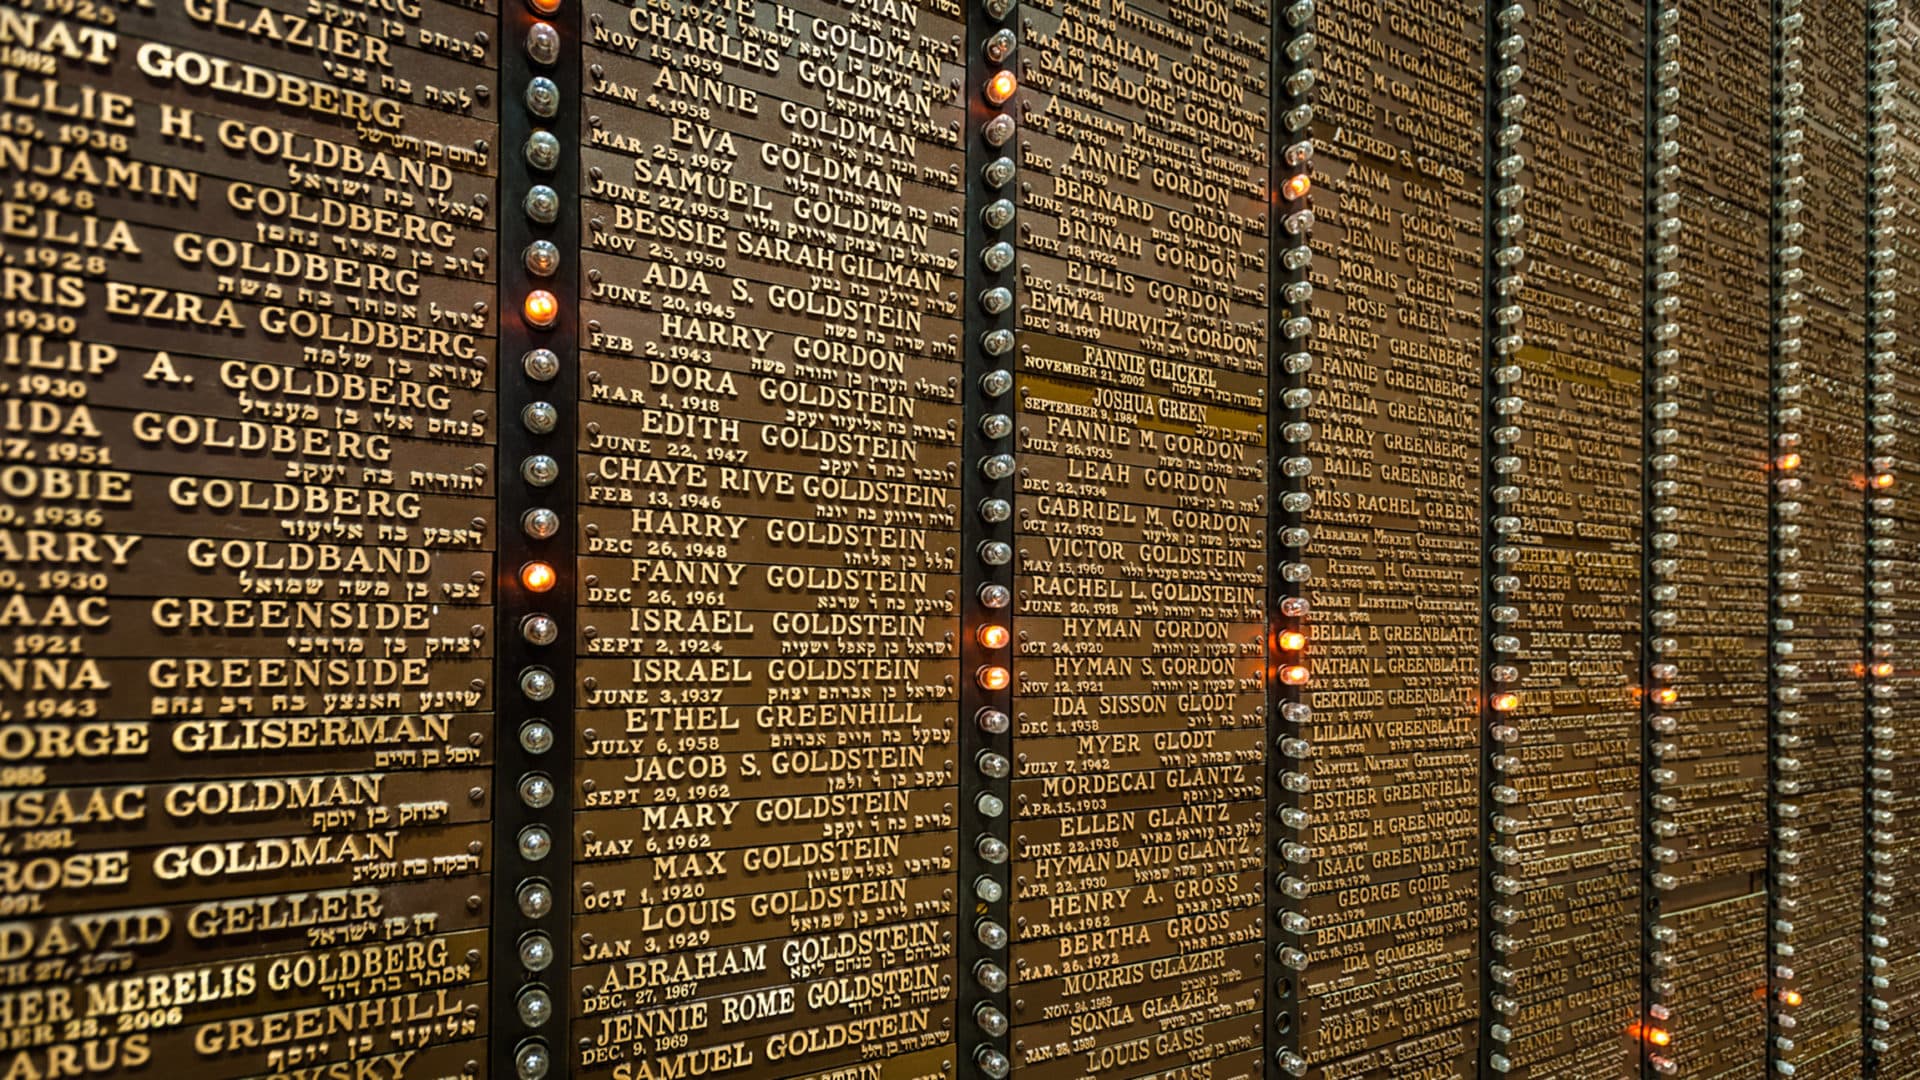 The names of residents and family members who have died are memorialized on the walls of the synagogue. (Courtesy Randall Armor)